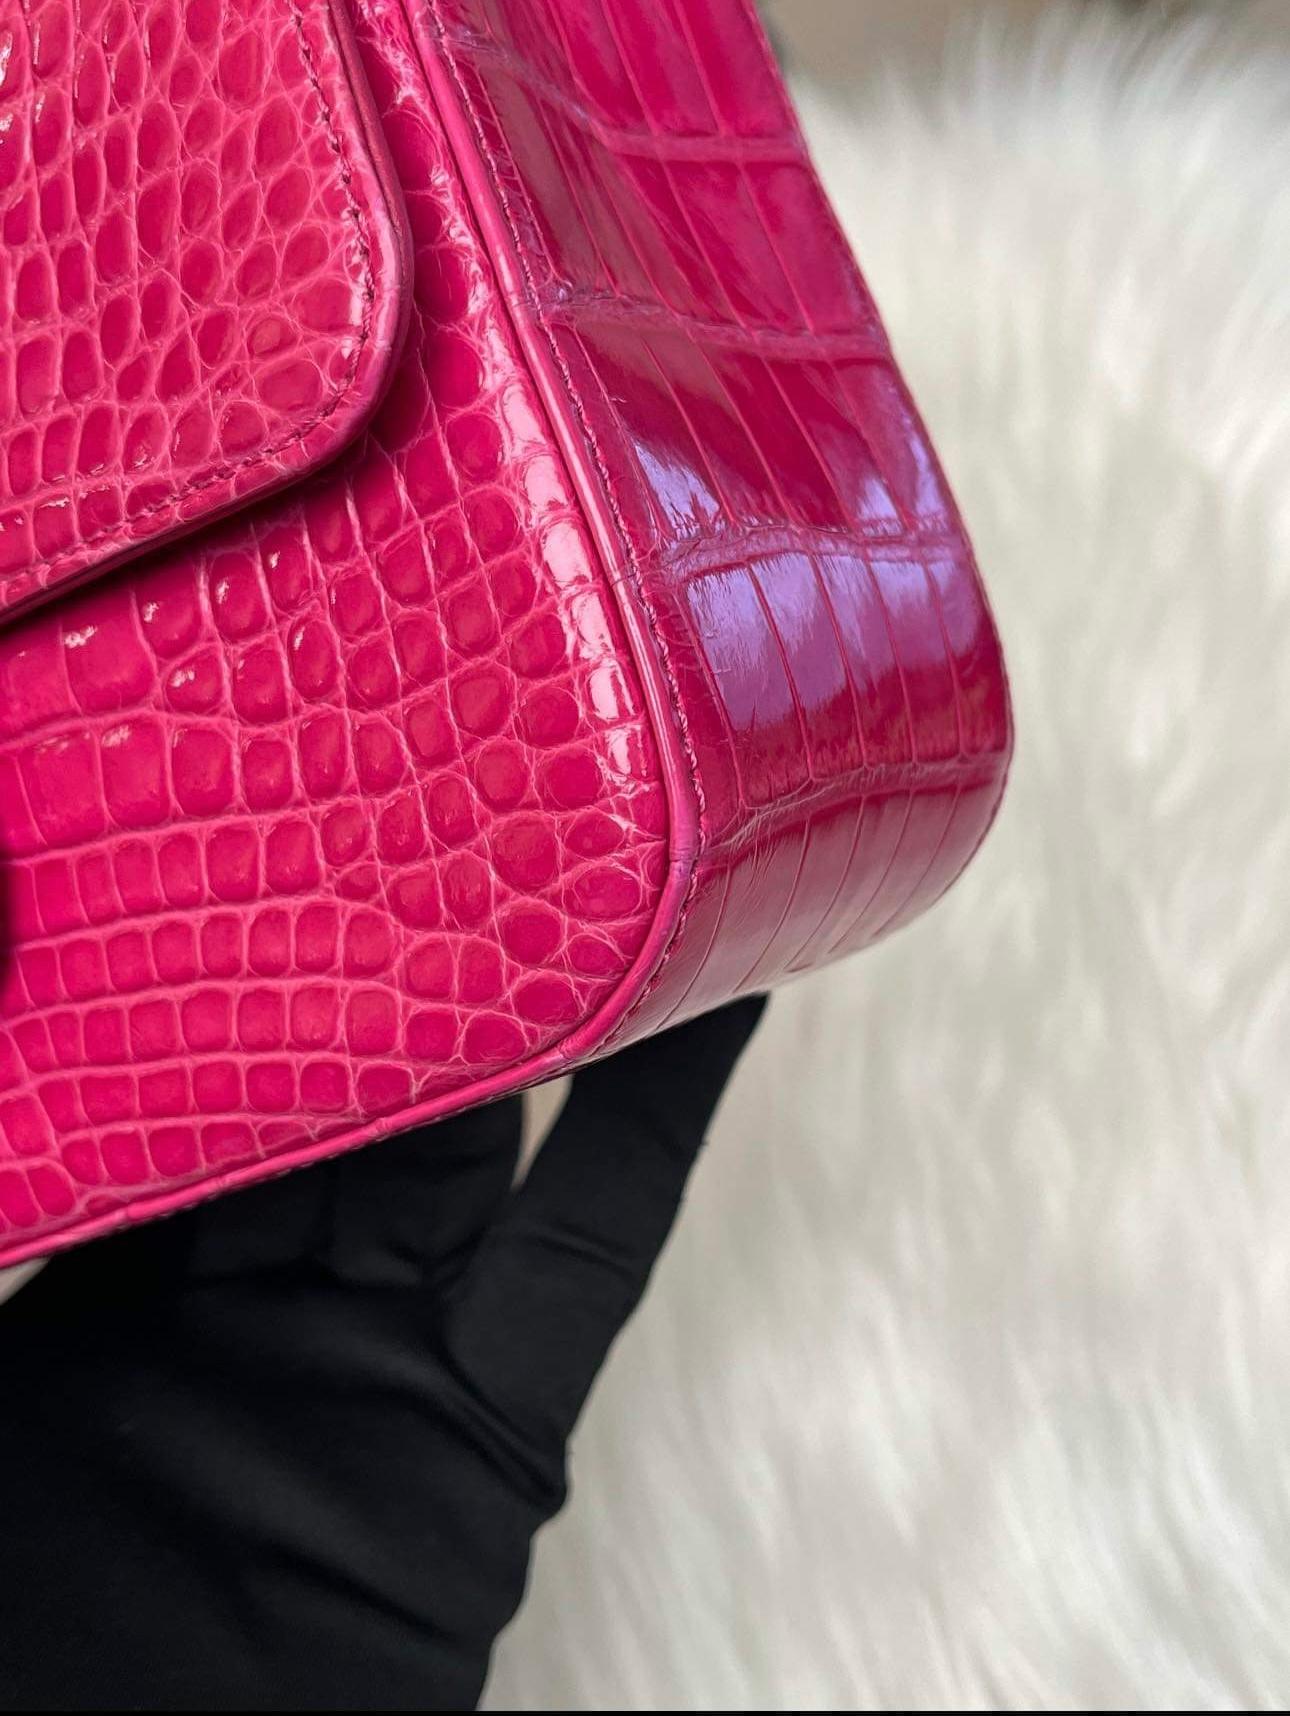 A rare find in hot pink/fuchsia with shiny gold hardware and special metal plaque label inside.
The iconic holy grail bag is the Chanel Classic Flap. Coveted for its simplicity and elegance - single woven chain, turnlock CC clasp, lambskin